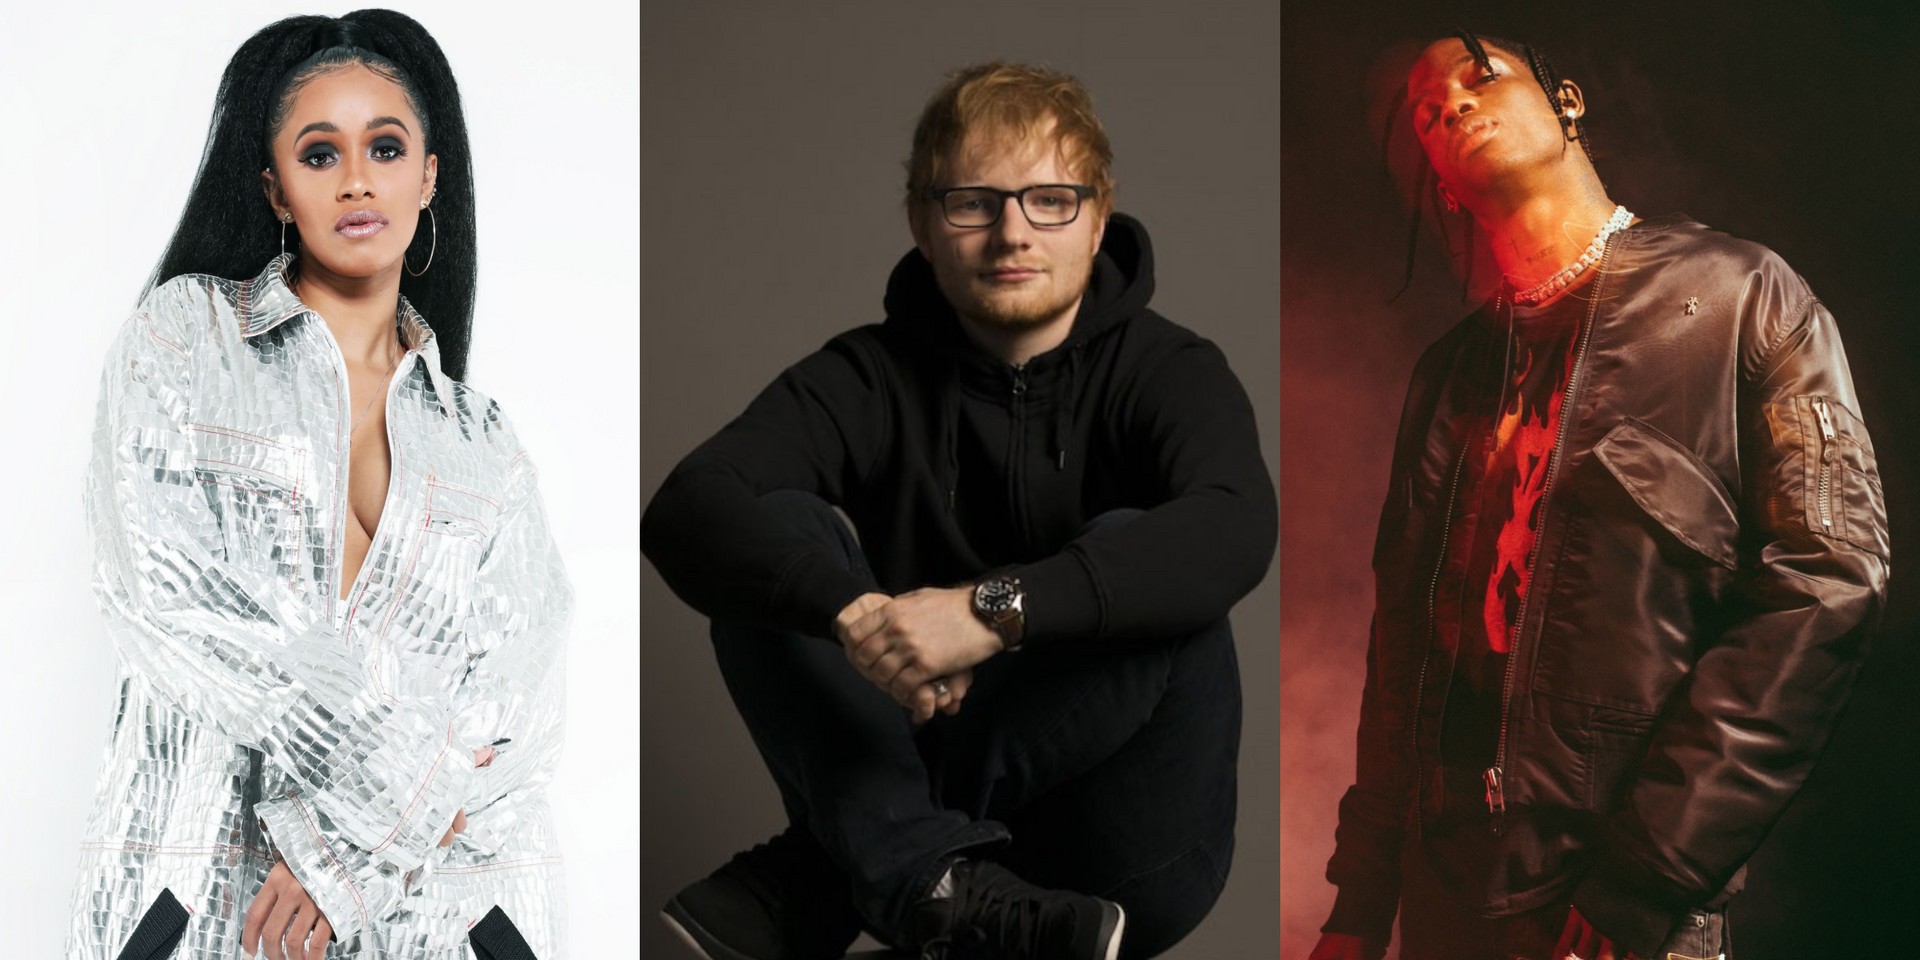 Ed Sheeran releases track list for No. 6 Collaborations Project, features Cardi B, Travis Scott, Skrillex and more 